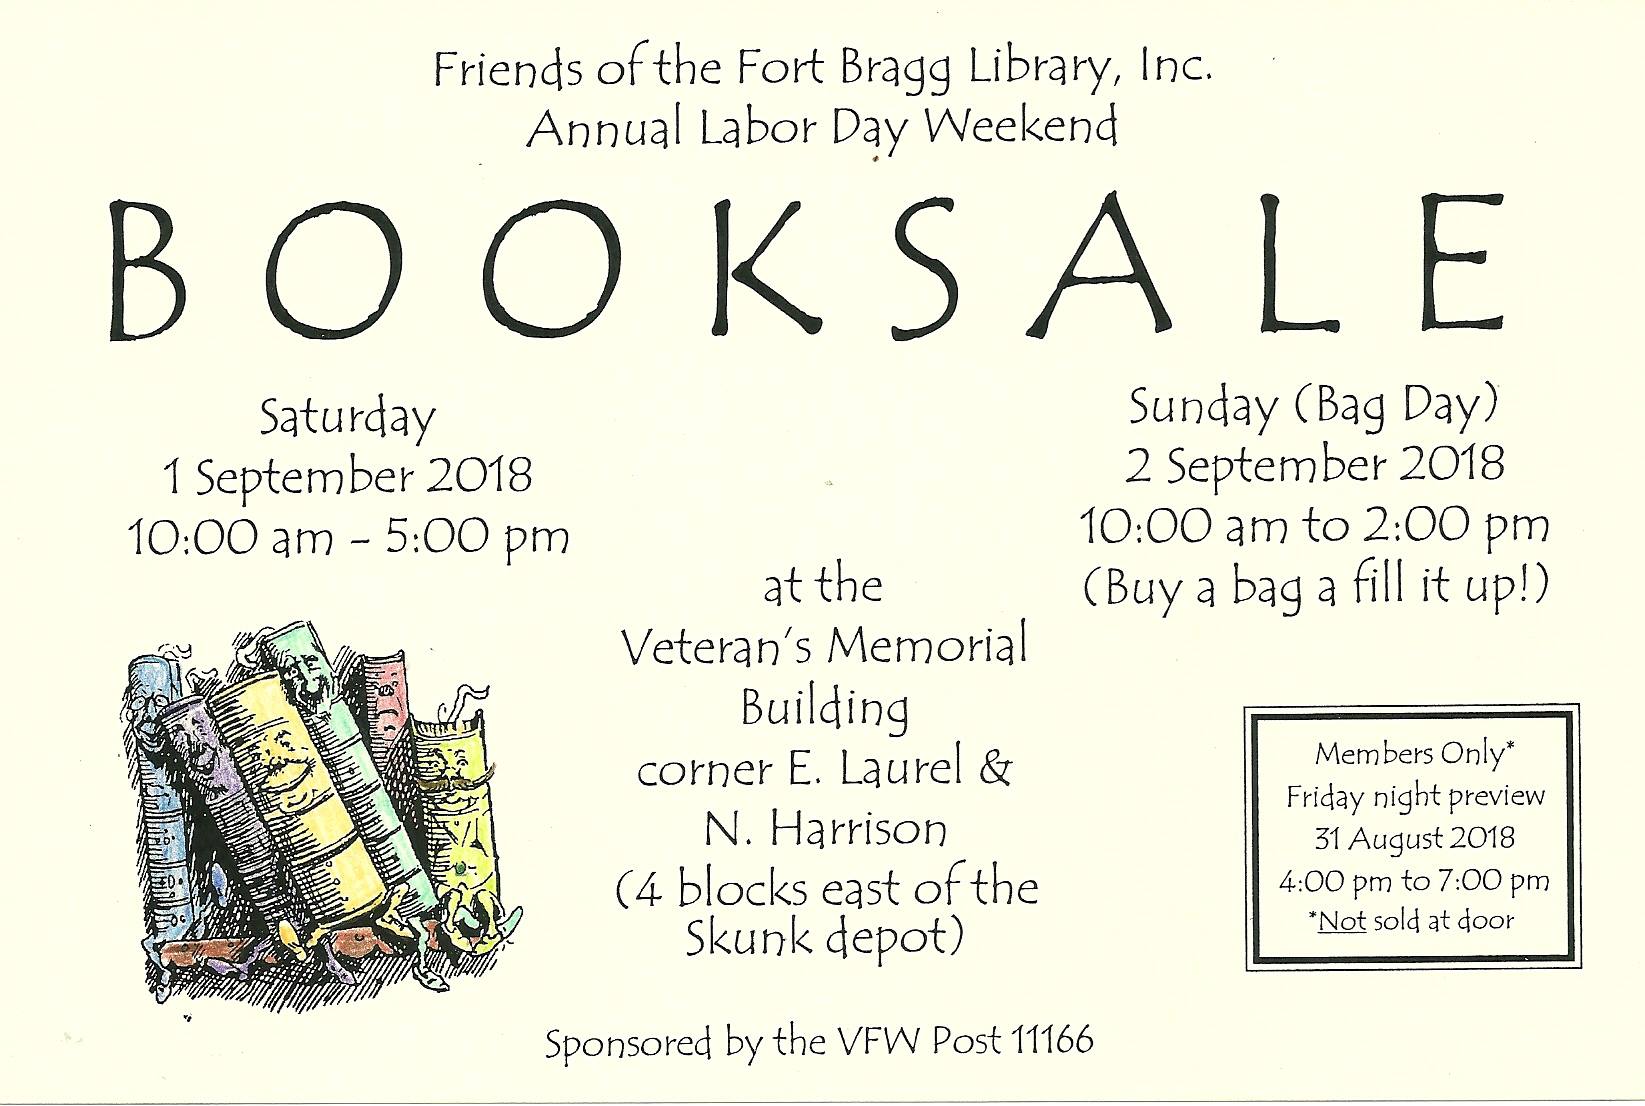 Labor Day Weekend Book Sale